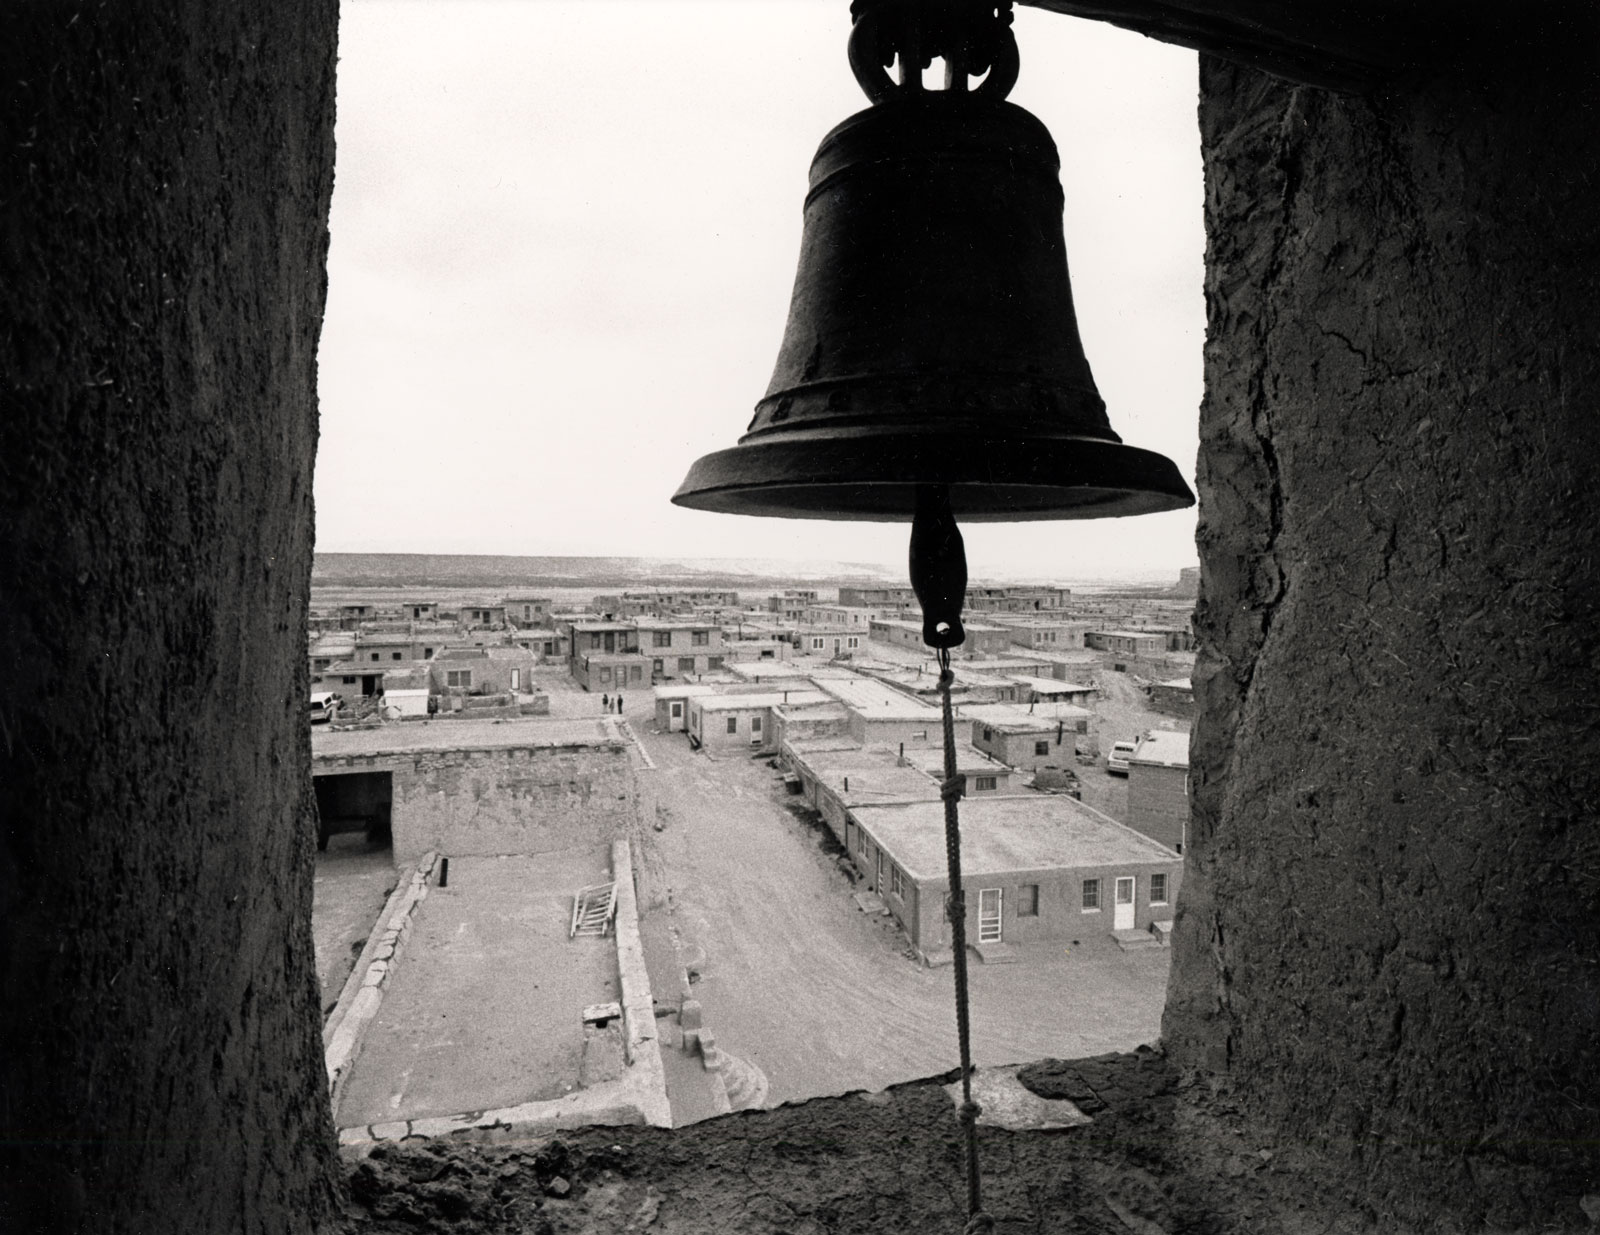 Lee Marmon, Acoma Mission Bell, 1985, gelatin silver print, #2000-017-0031, Center for Southwest Research, University of New Mexico